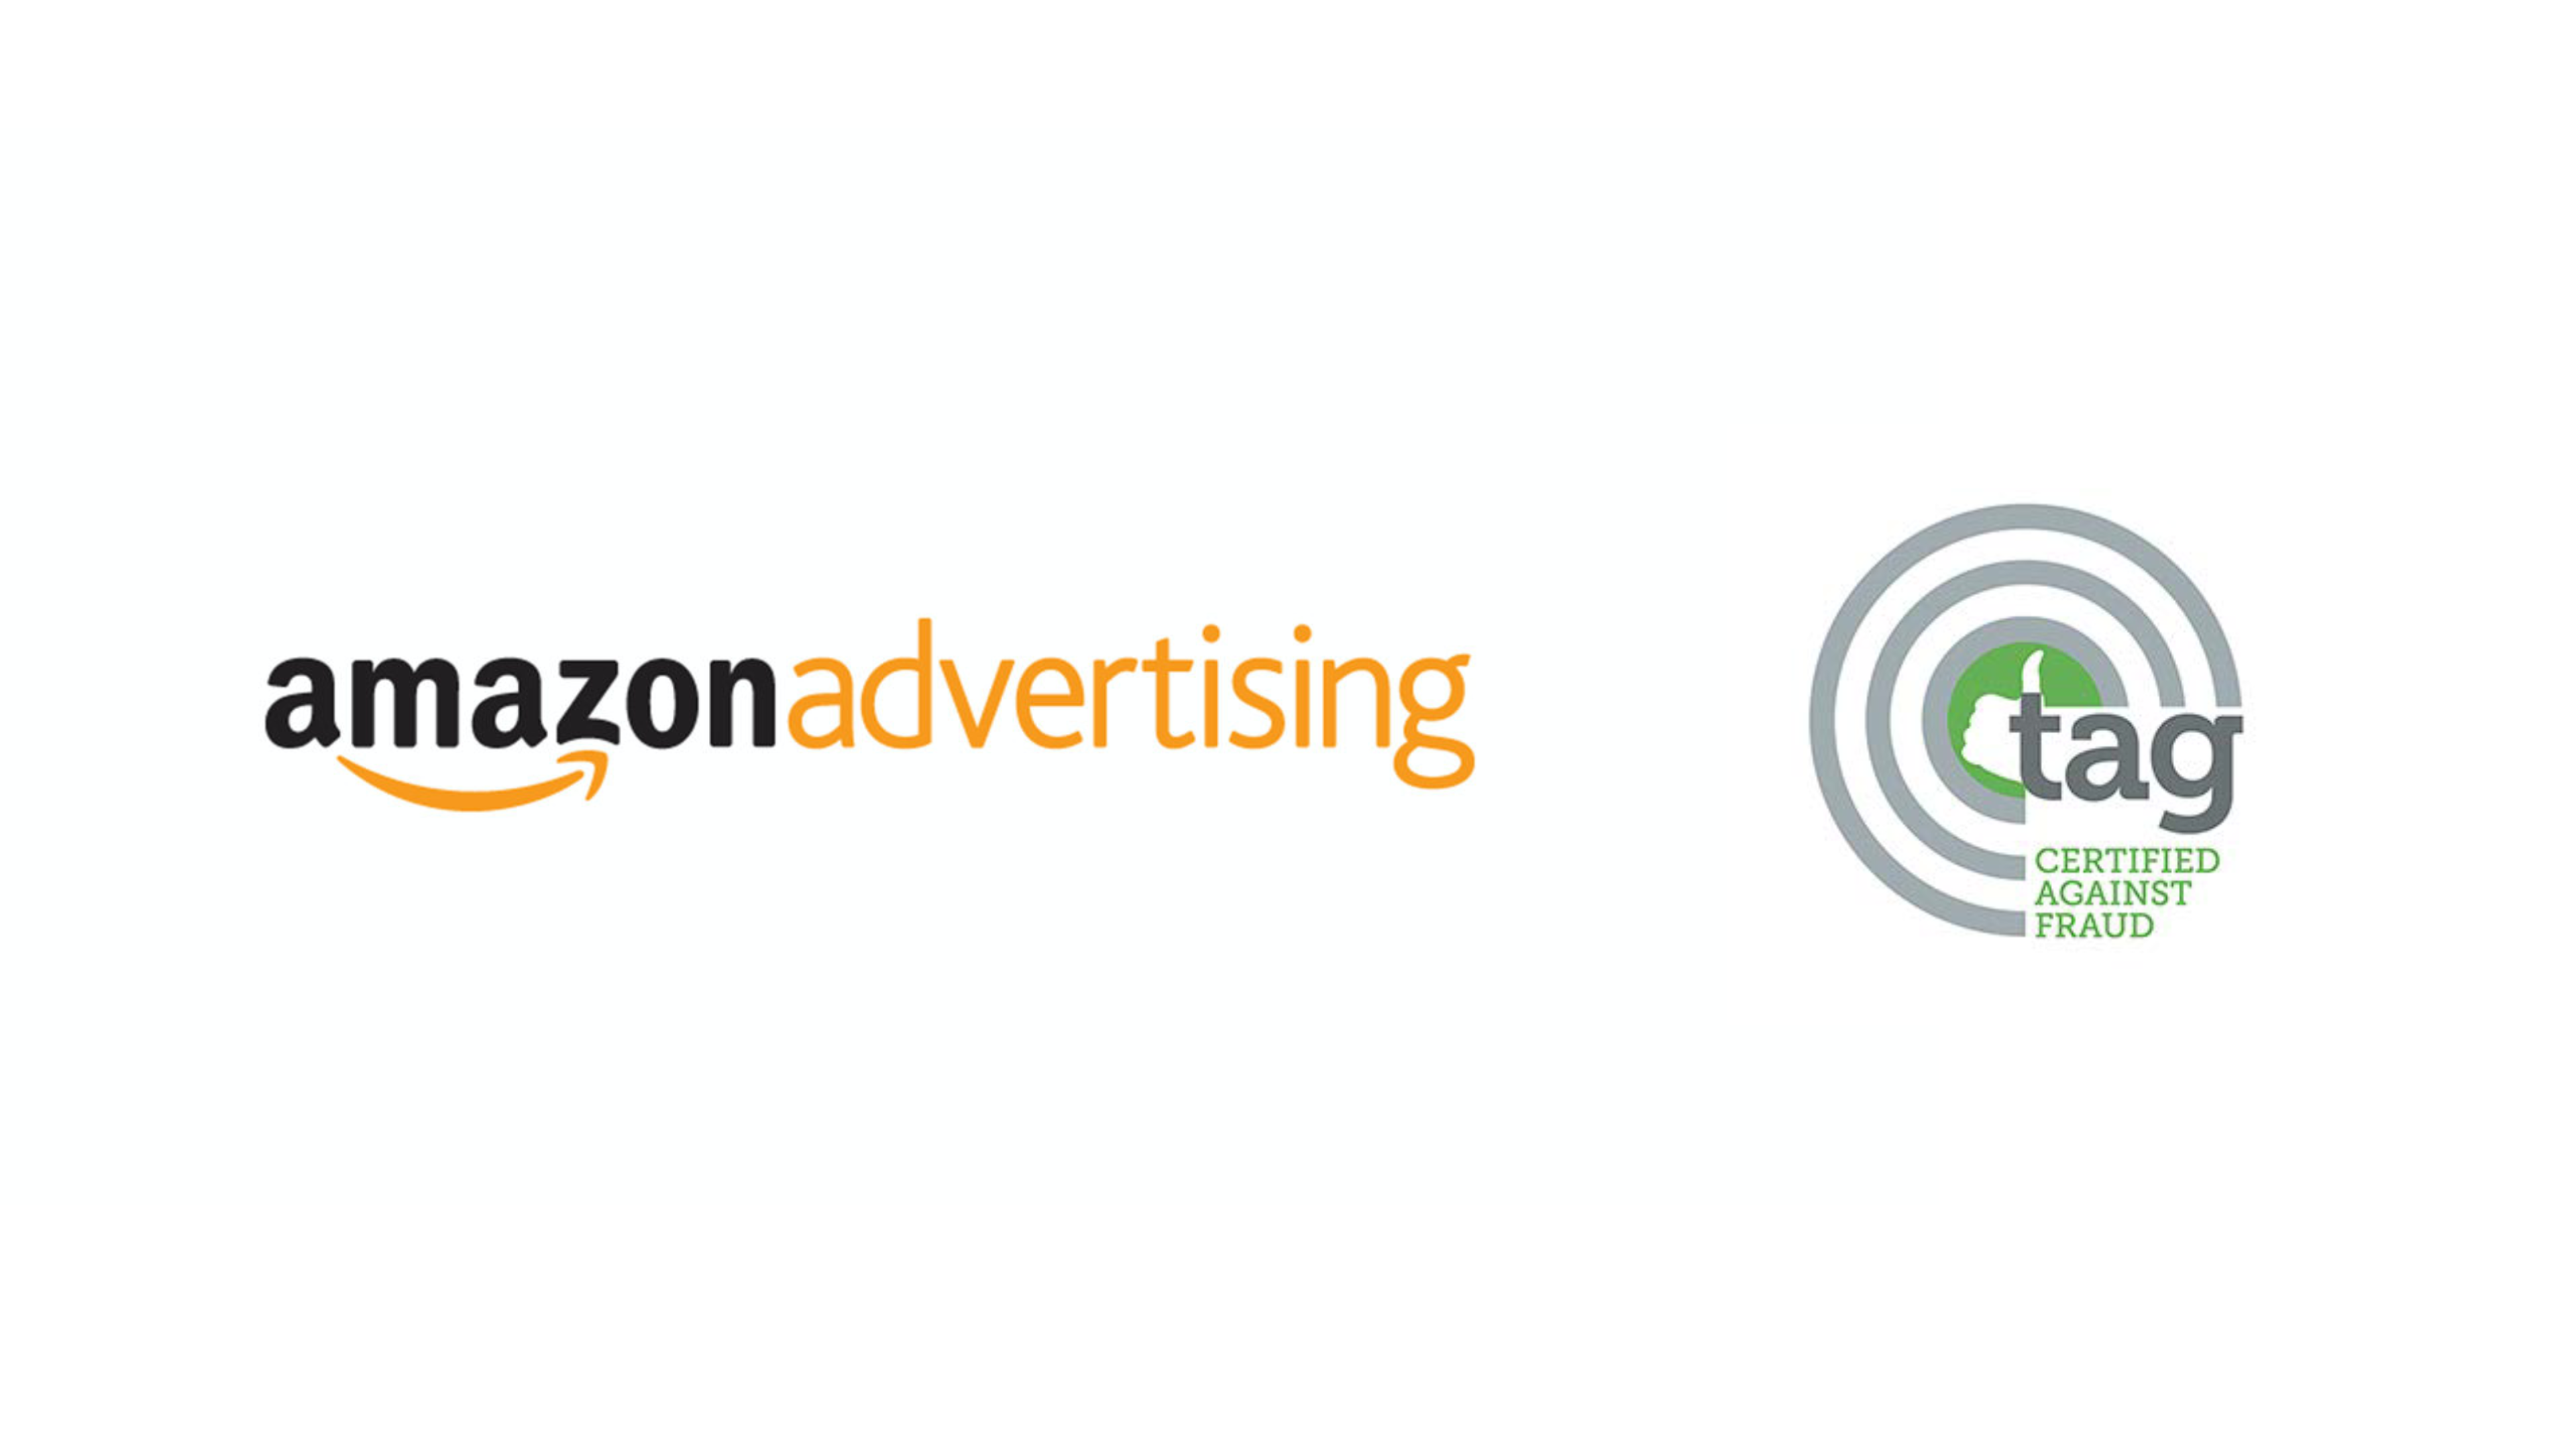 amazon advertising is now tag certified